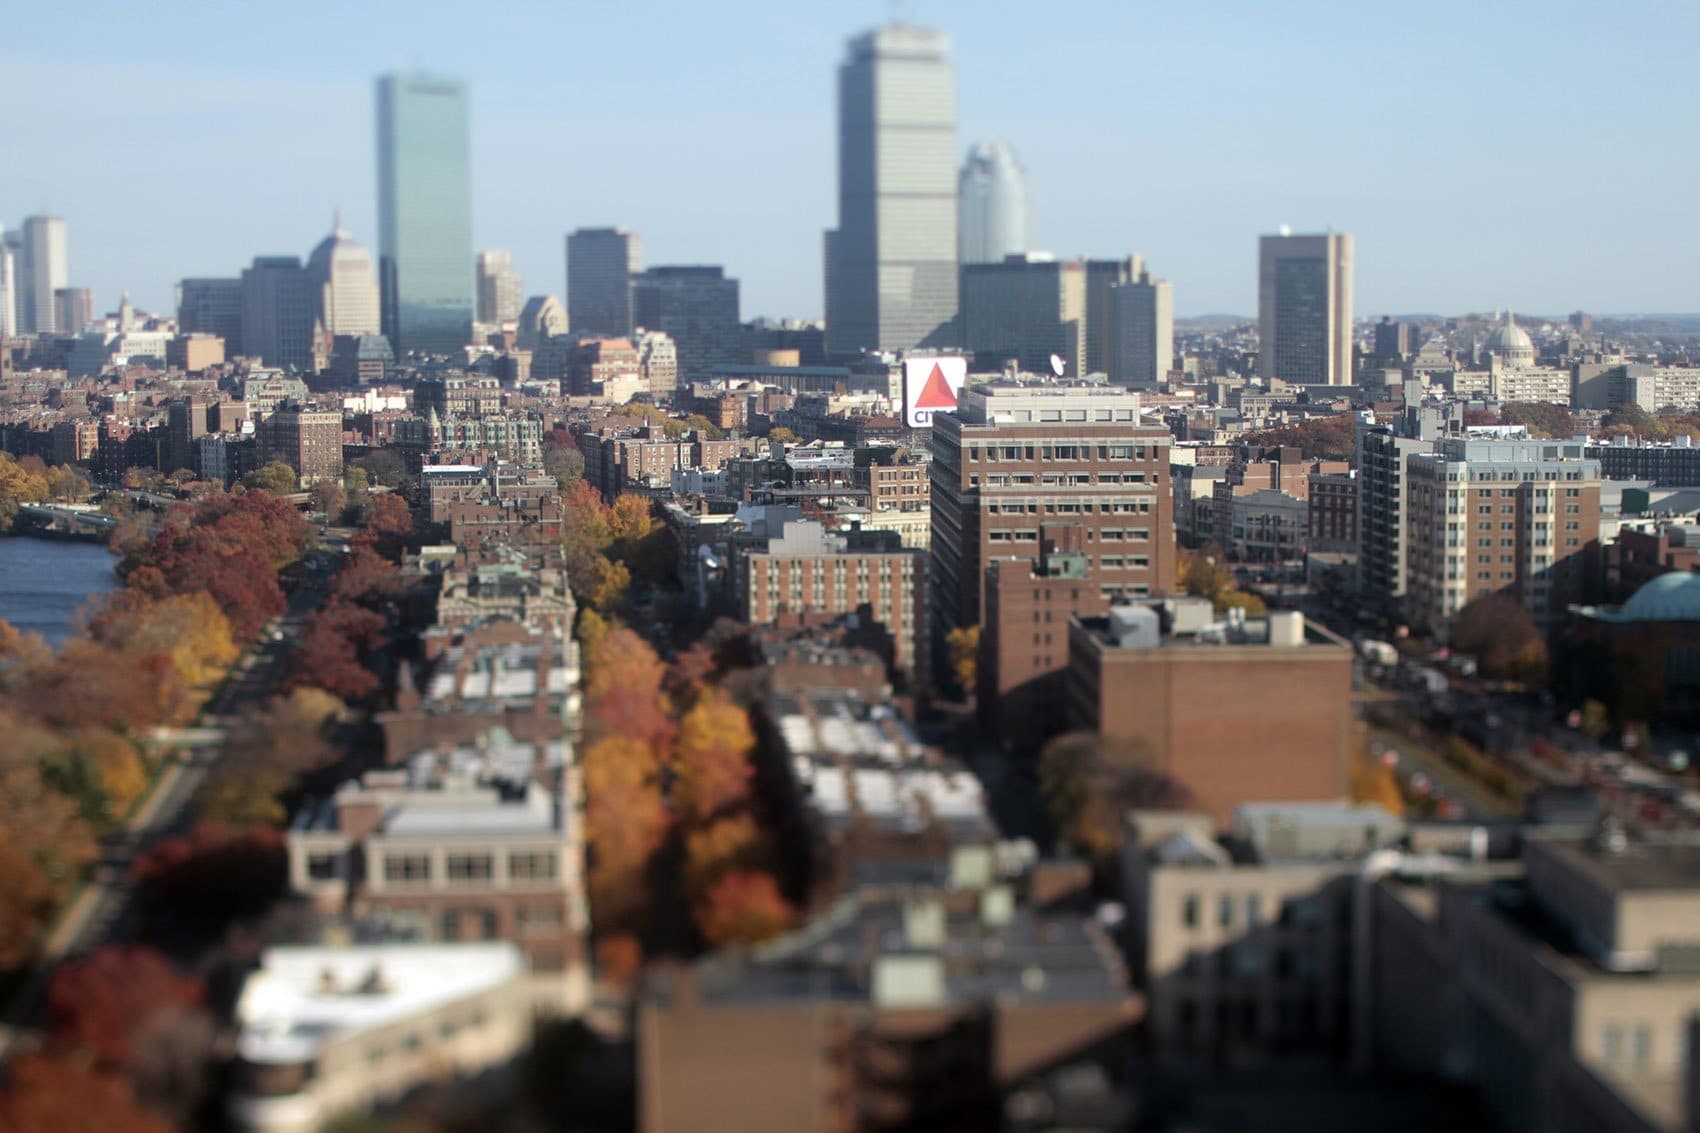 The Citgo sign has been in Kenmore Square since 1965. It's located at 660 Beacon St., atop a building owned by Boston University. BU is looking to sell that building and several others in Kenmore to private developers. (Joe Difazio for WBUR)